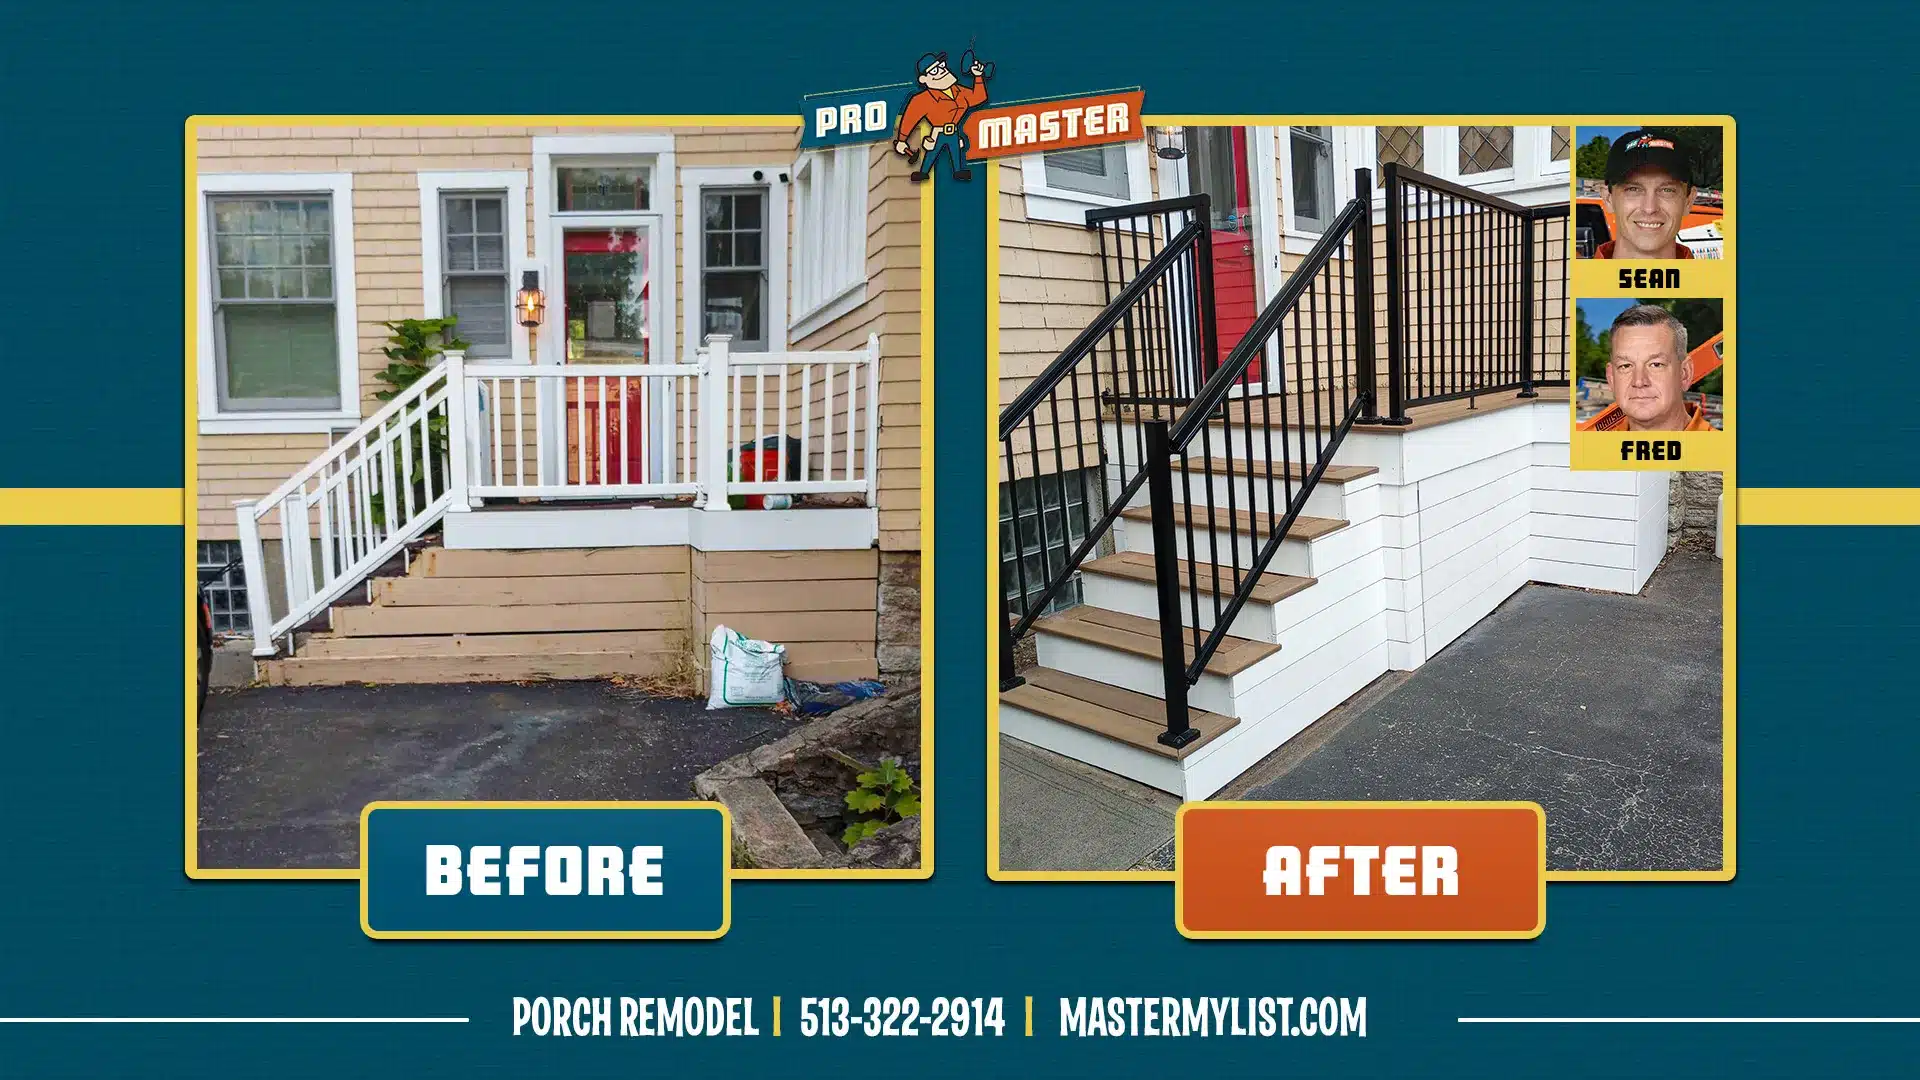 Before and After of porch remodel by ProMaster craftsman.